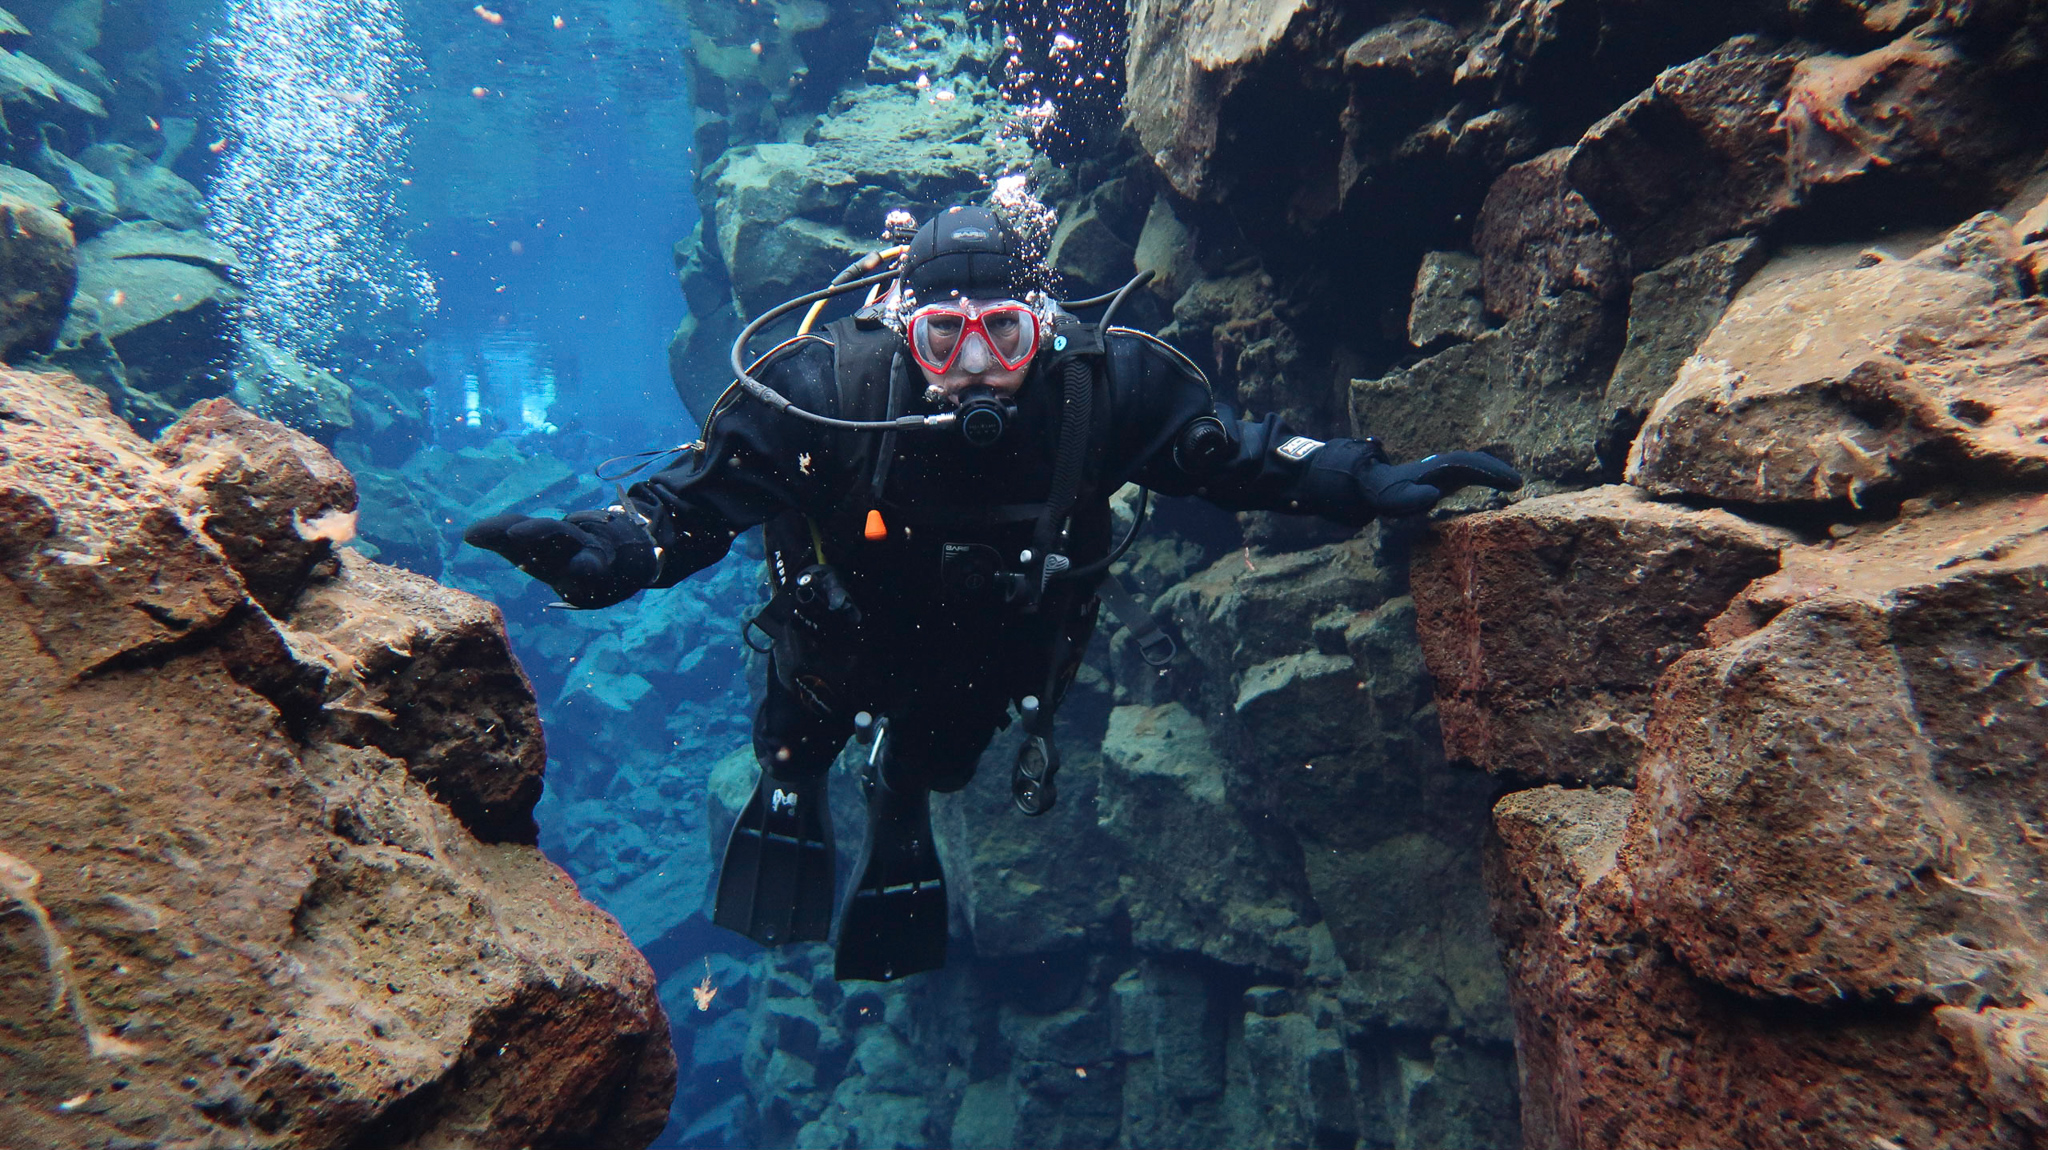 Europe on one side, North America the other while scuba diving at Silfra Fissure in Thingvellir National Park, Iceland. Photo by Tania Roque of DIVE.IS